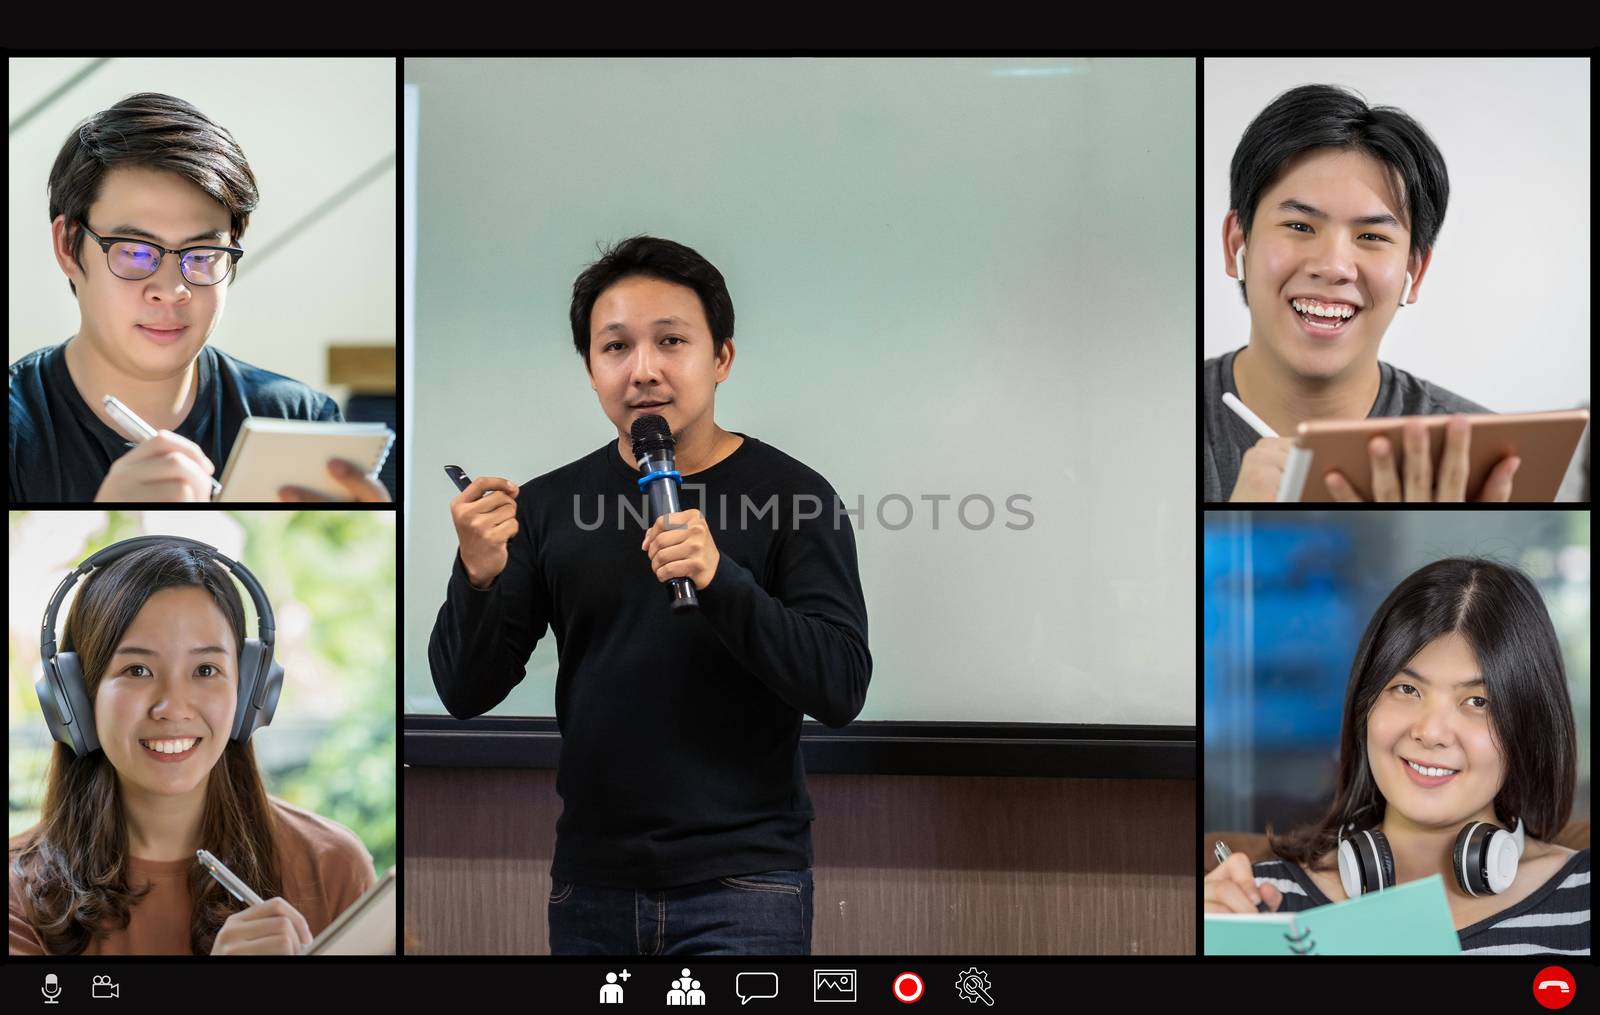 Asian Teacher or Speaker and student e-learning and meeting with colleague in video call conference when Covid-19 pandemic,Coronavirus outbreak,online meeting,Social distancing and new normal concept